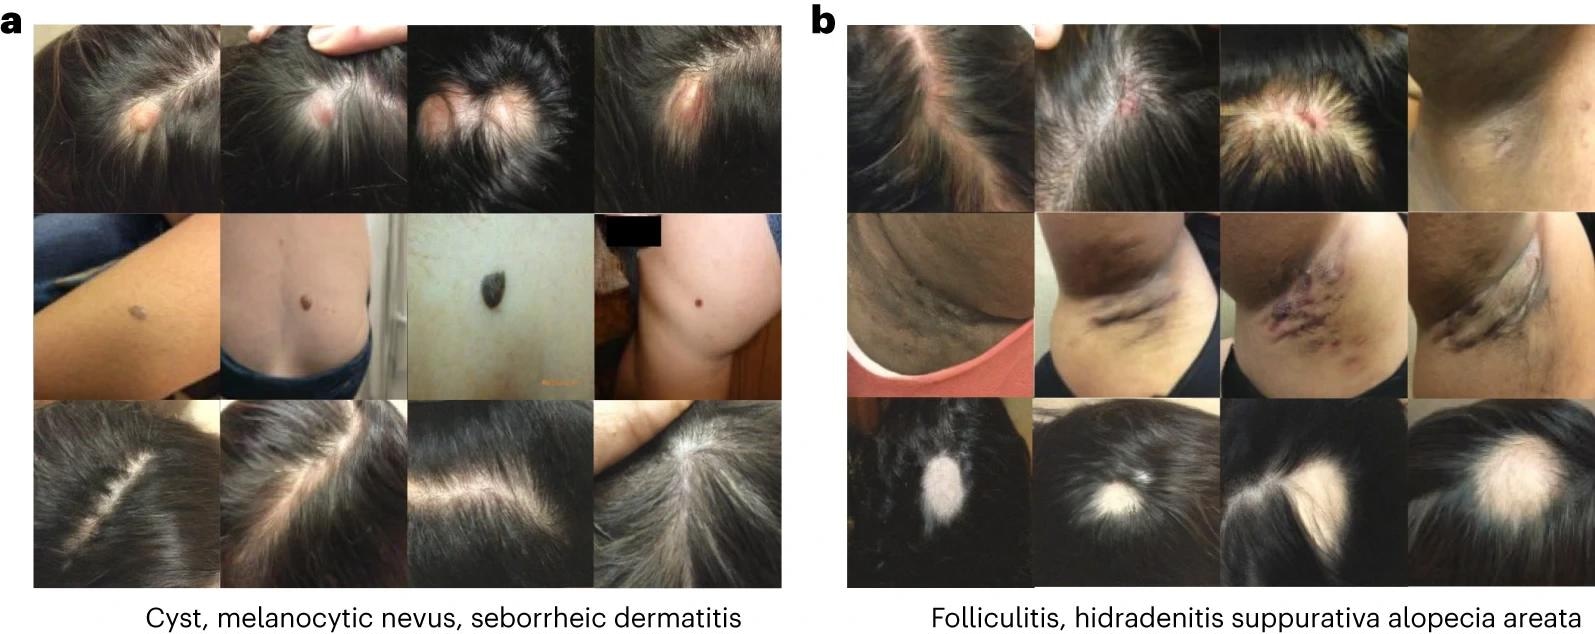 Generated images in the dermatology setting. Each row of images corresponds to a different condition. a, Generated images for cyst, melanocytic nevus and seborrheic dermatitis. b, Generated images for folliculitis, hidradenitis and alopecia areata.